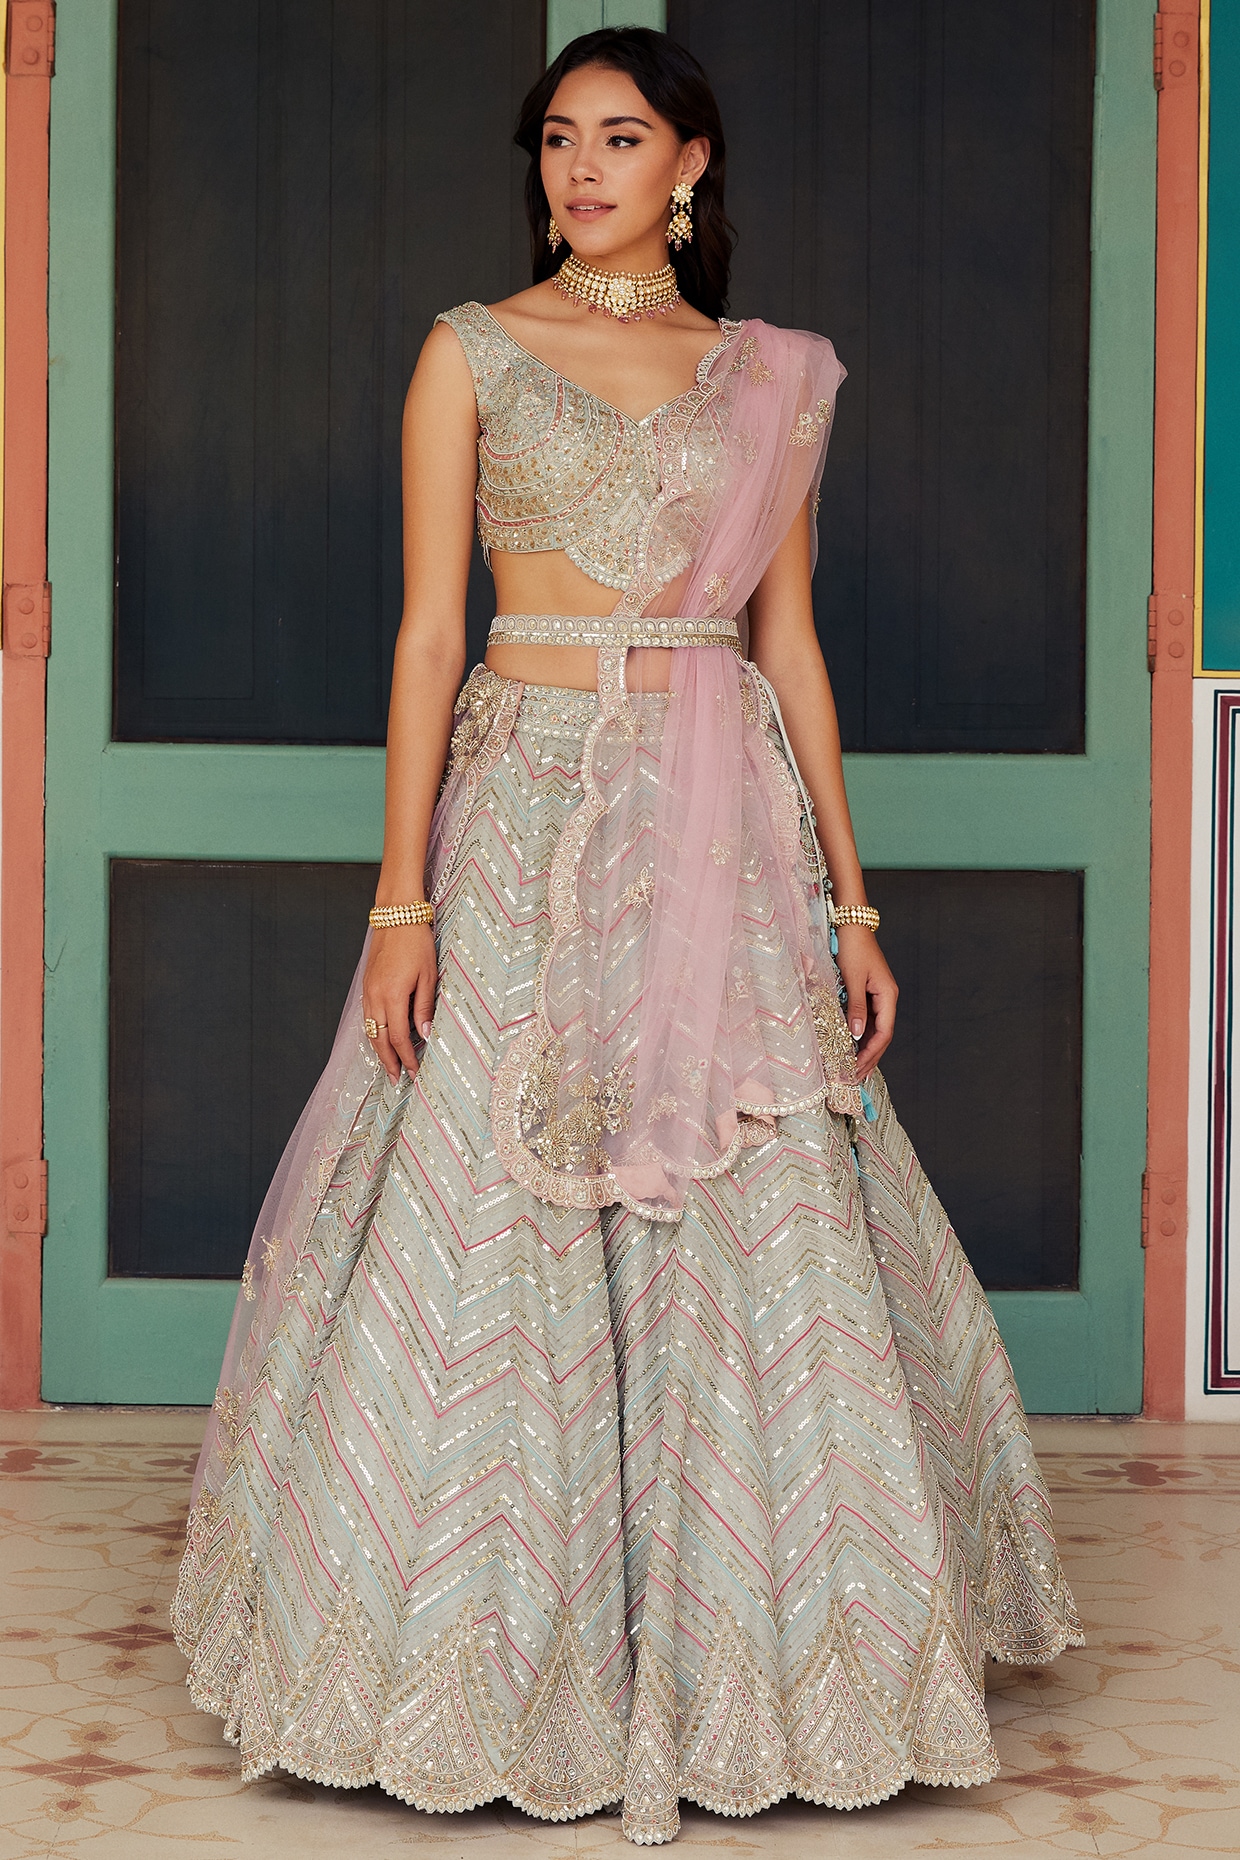 How to Style Ikkat Lehengas for Different Occasions? | Tapathi